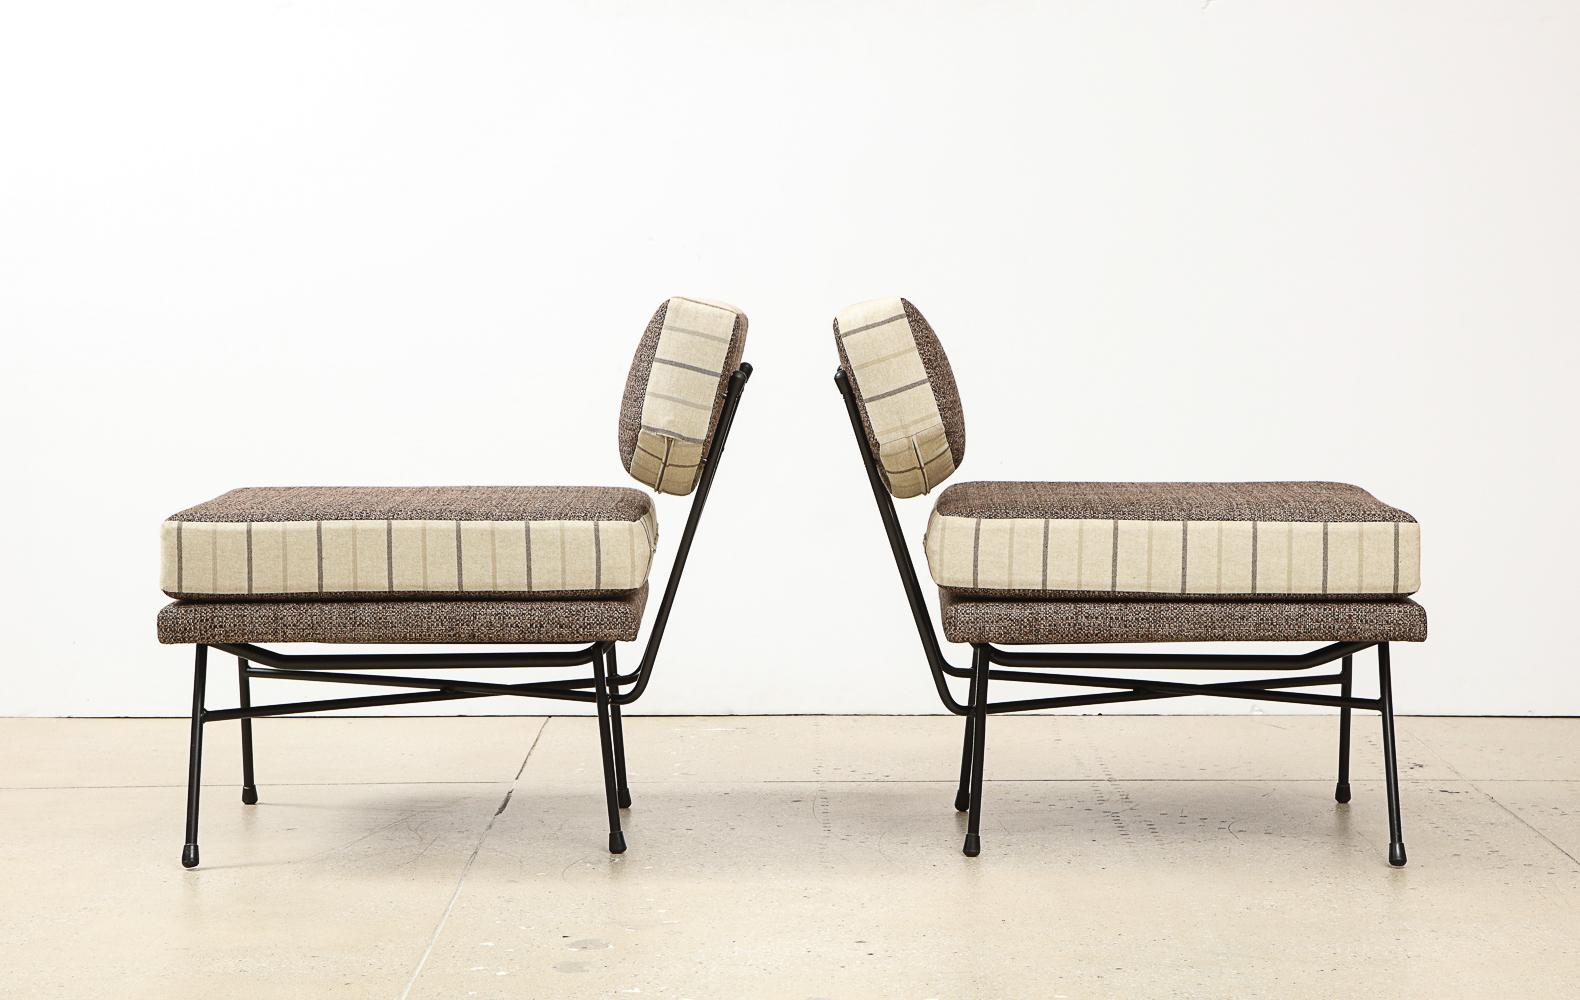 Hand-Crafted Rare Pair of Elettra Lounge Chairs by Studio BBPR for Arflex